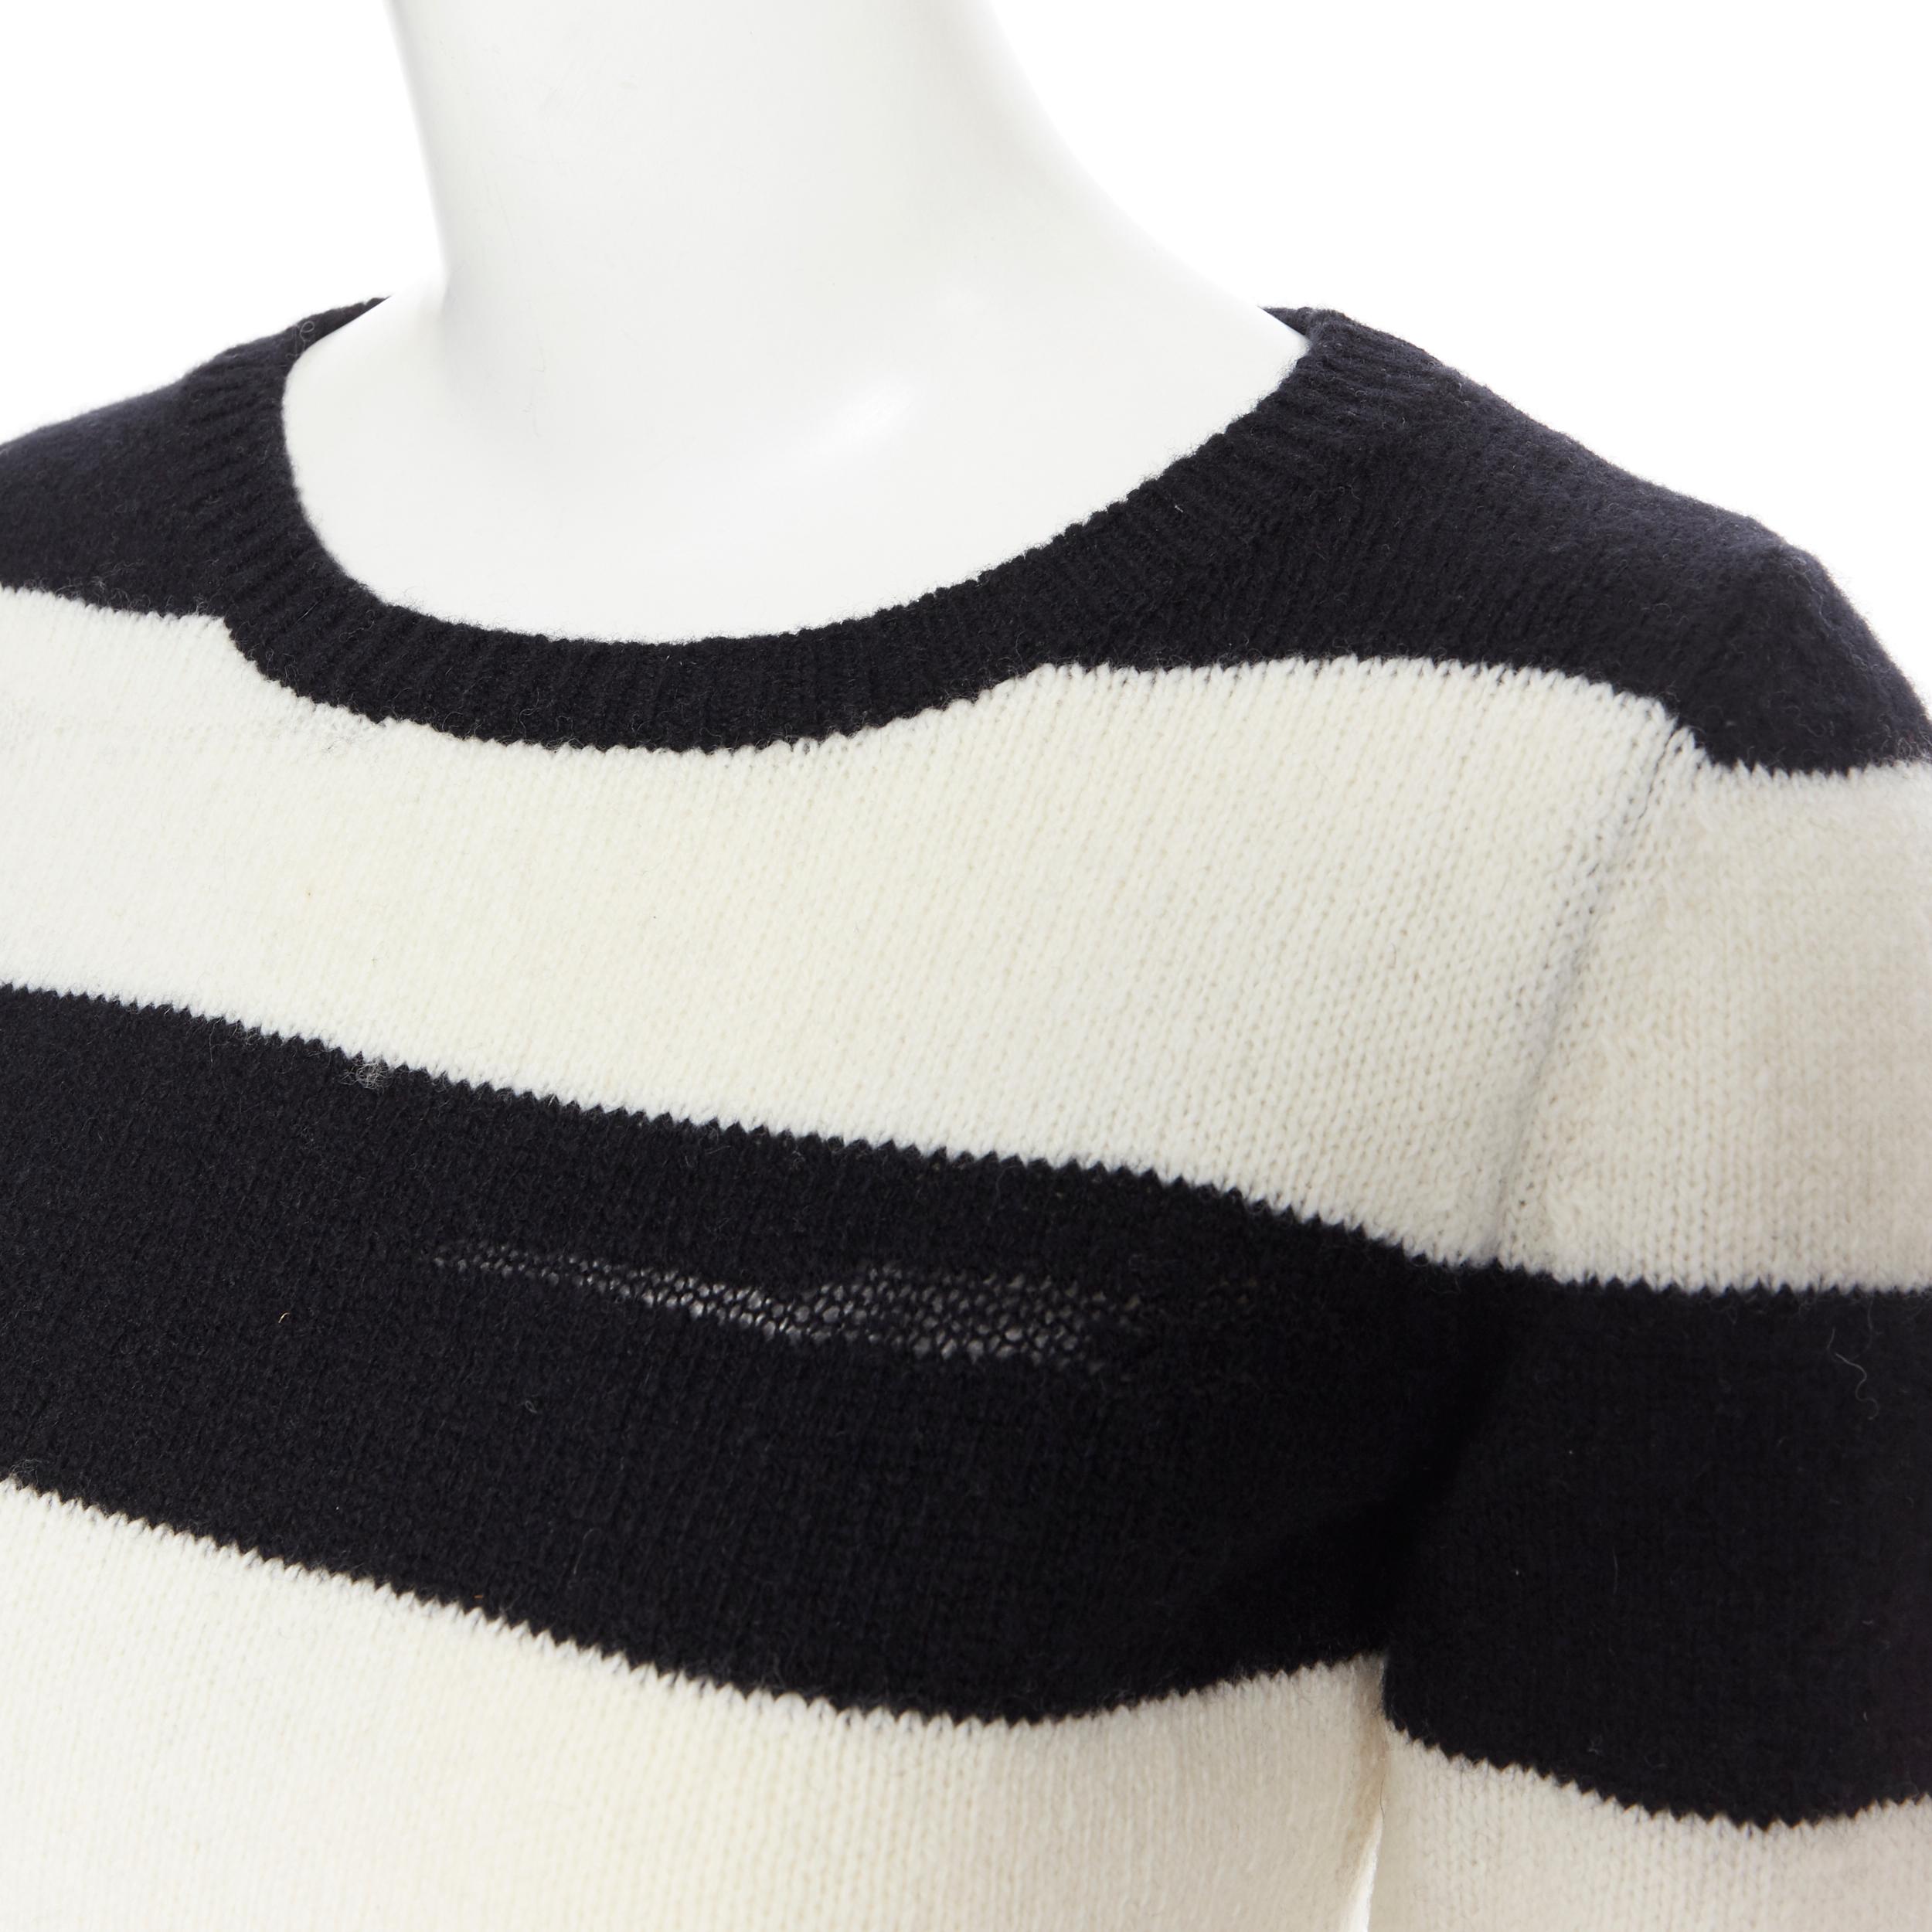 SAINT LAURENT 2015 black white striped distressed holey knit sweater top XS 1